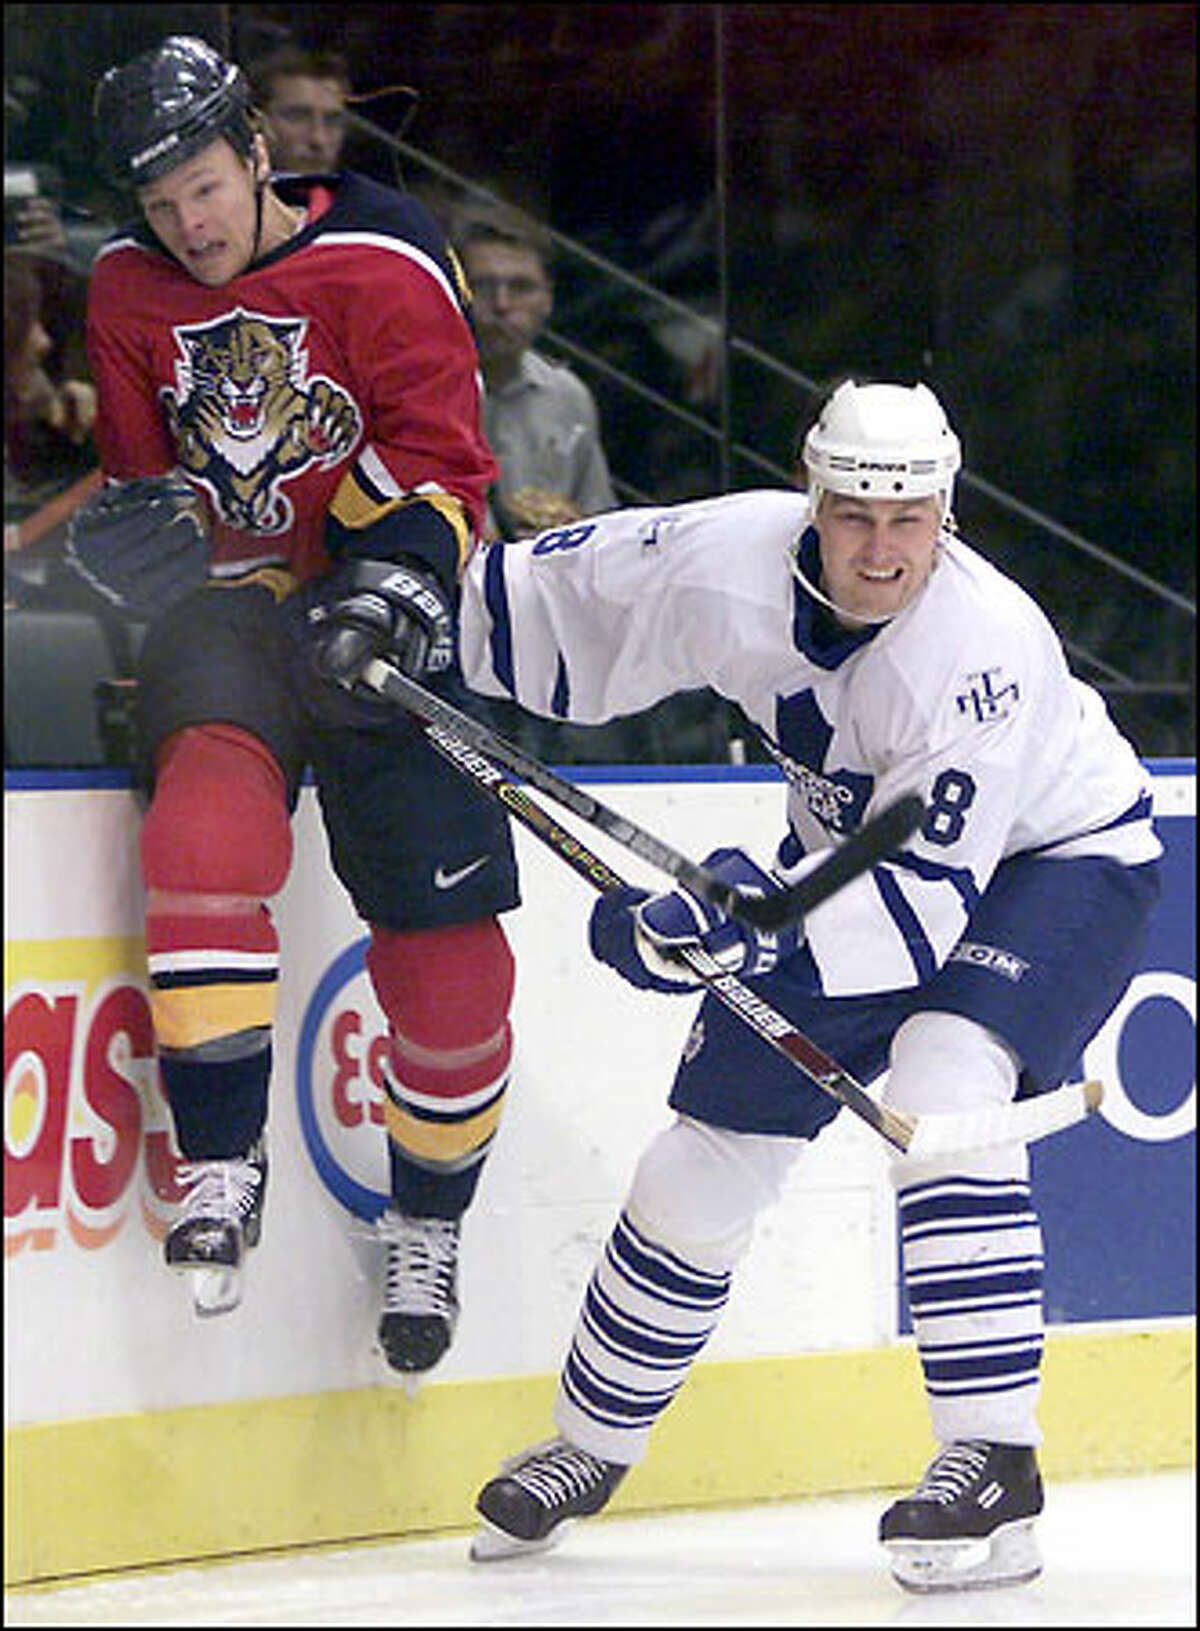 Toronto defenseman Aki Berg hammers Florida center Kevyn Adams up and into the boards during the Maple Leafs' 5-1 victory.